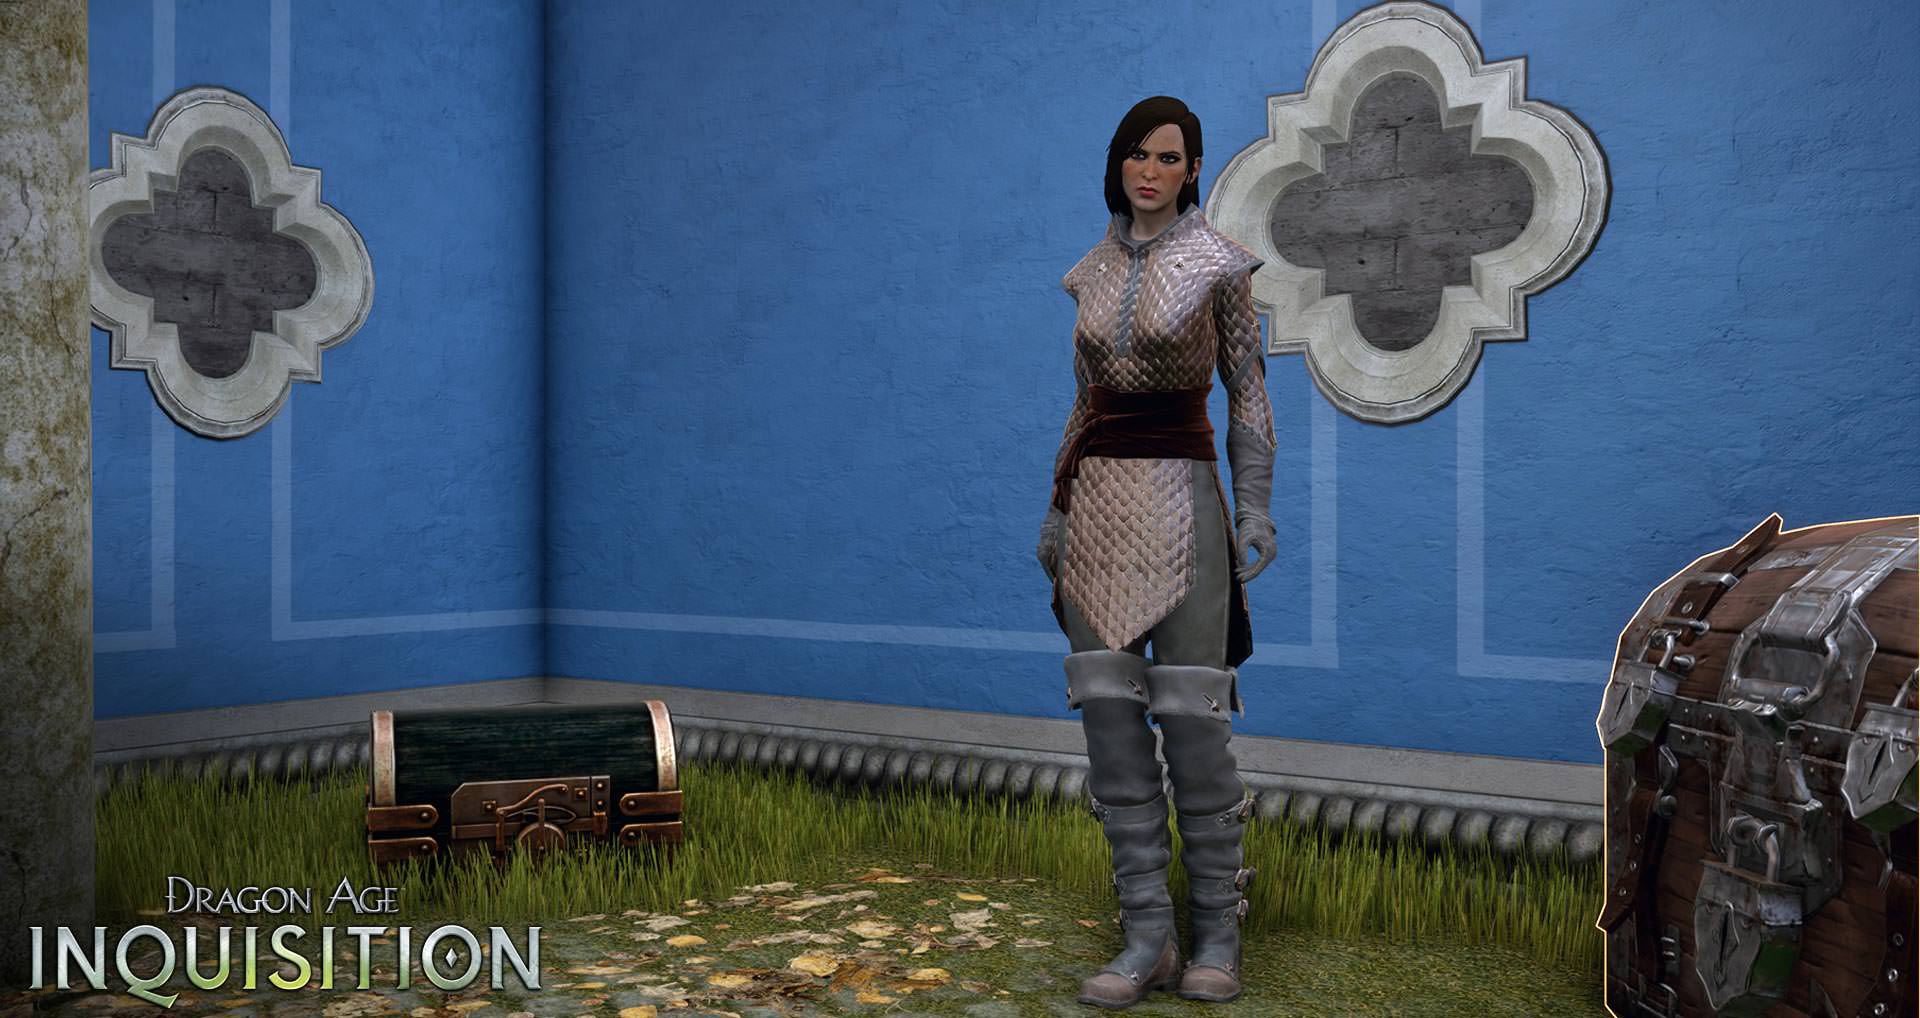 Dragon age inquisition latest patch download